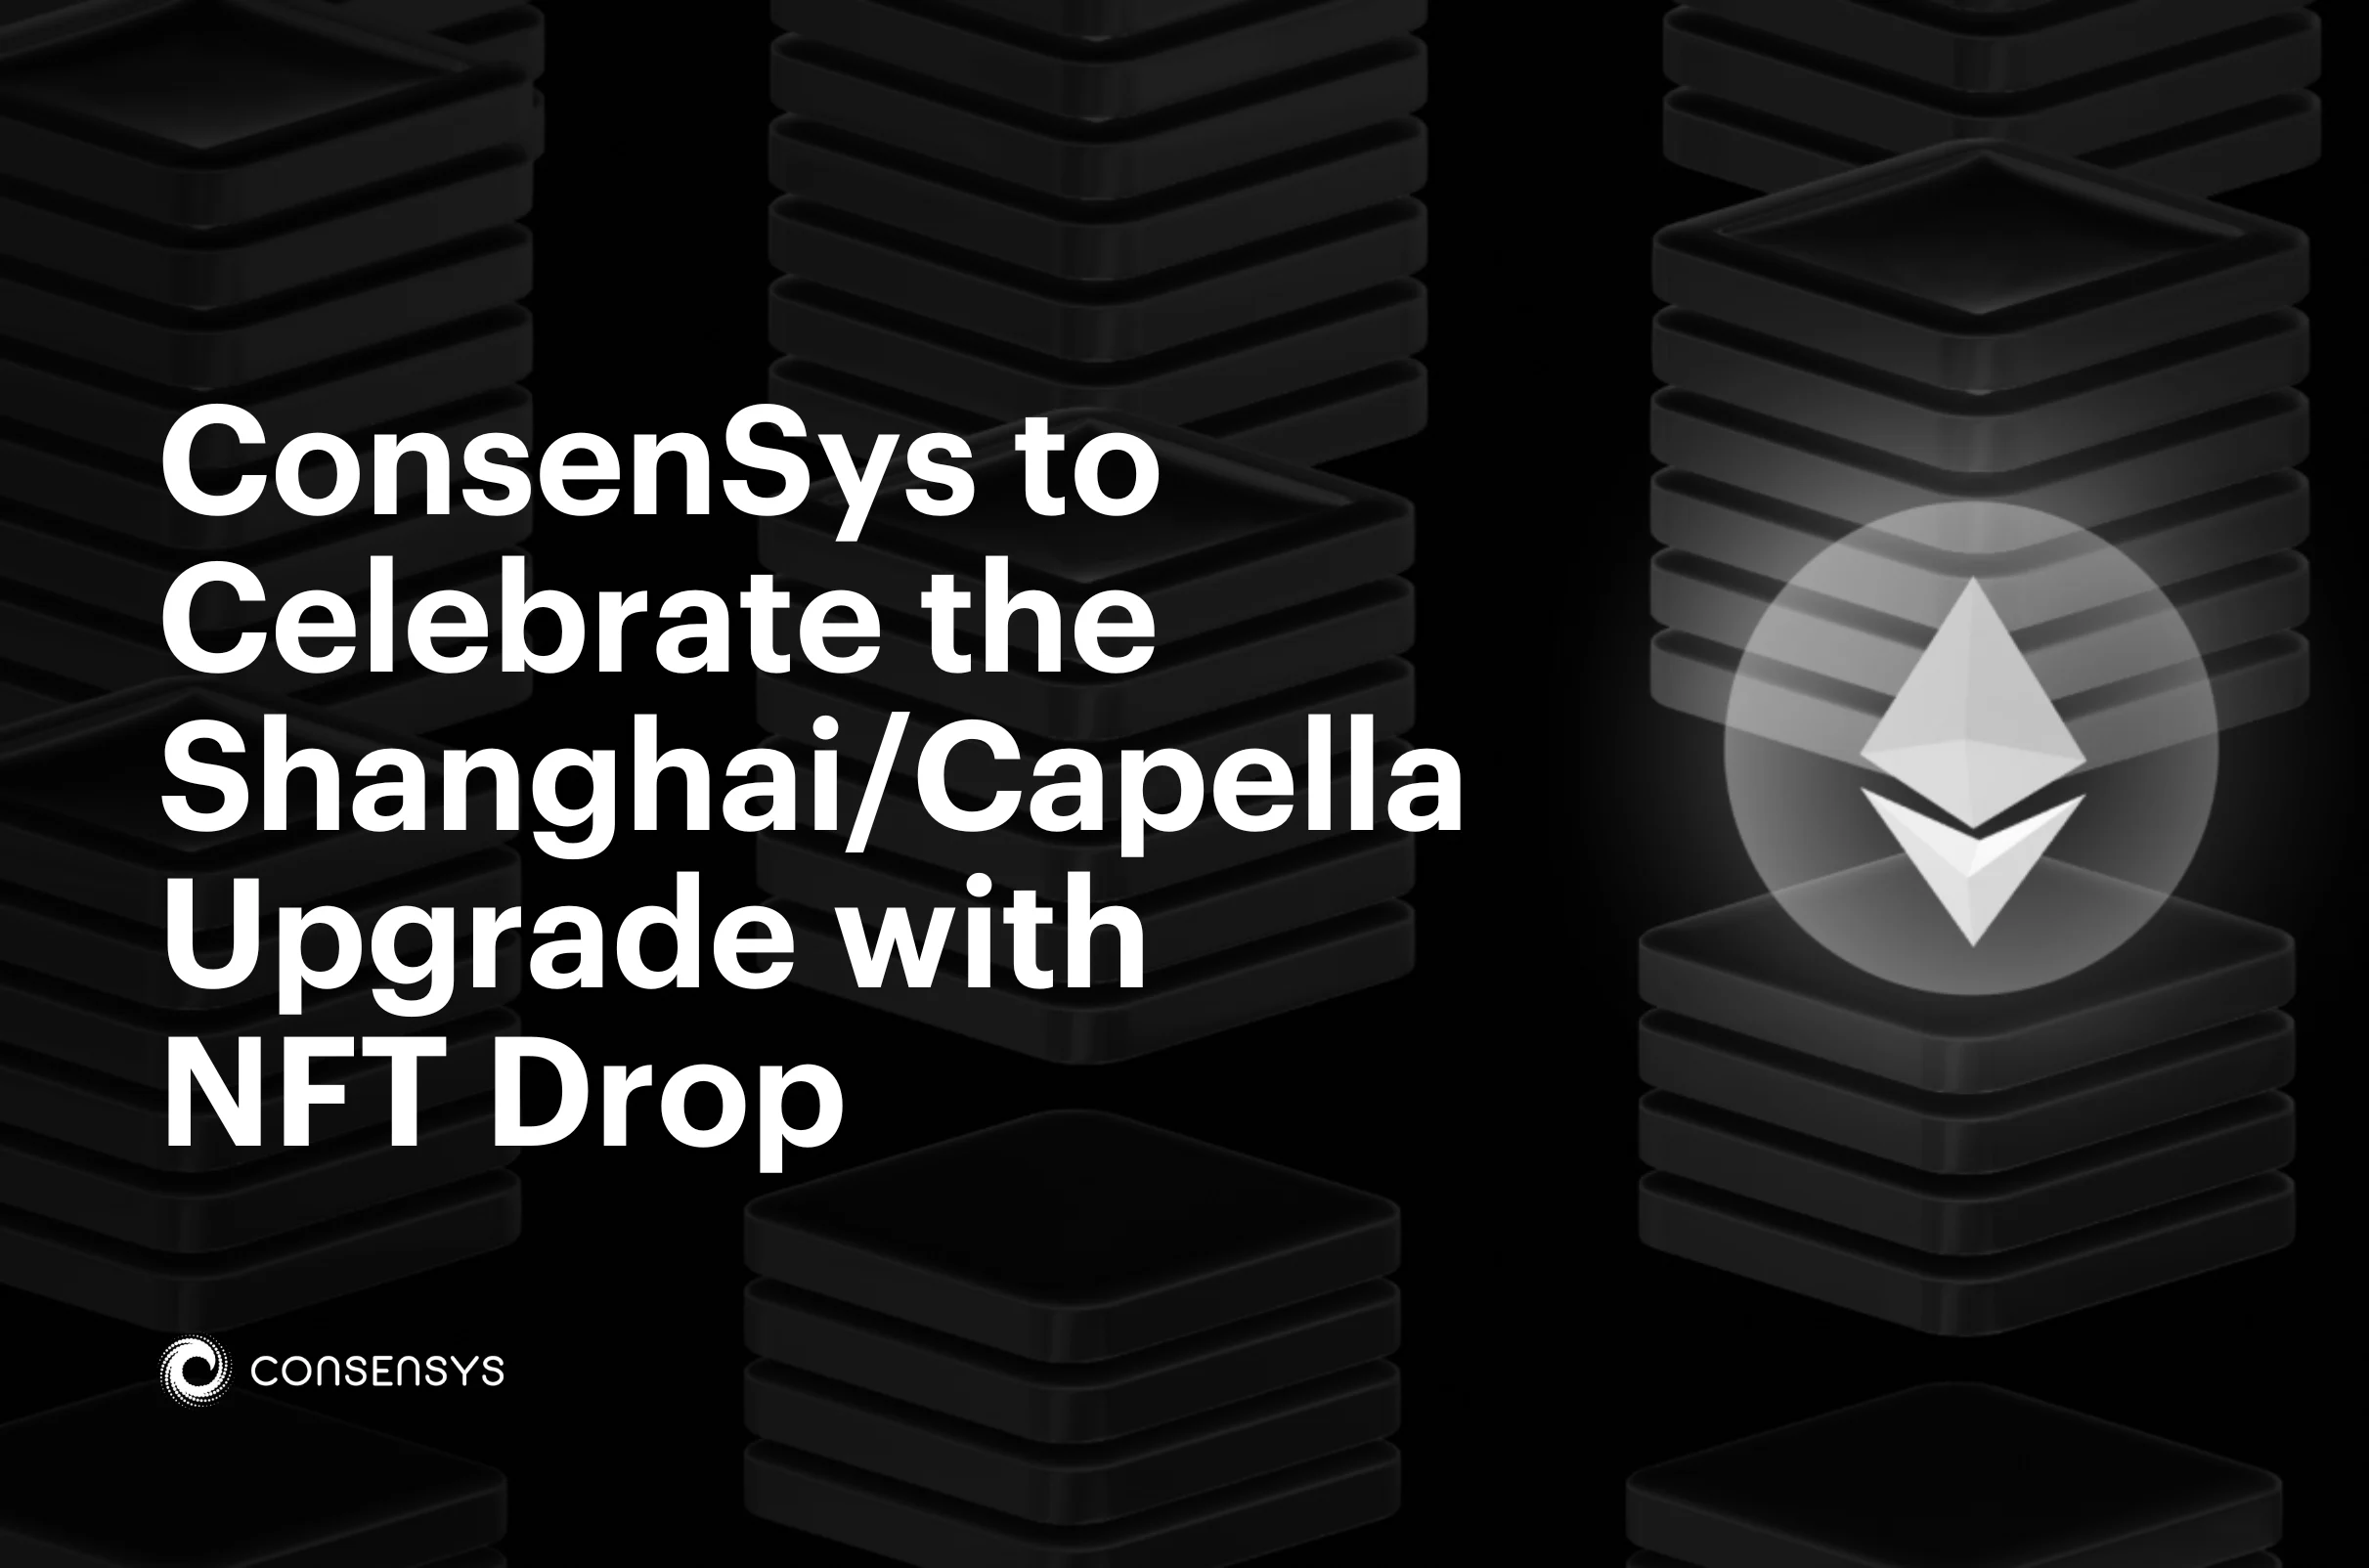 Image: Shanghai/Capella Upgrade: Consensys to Celebrate the Milestone with NFT Drop